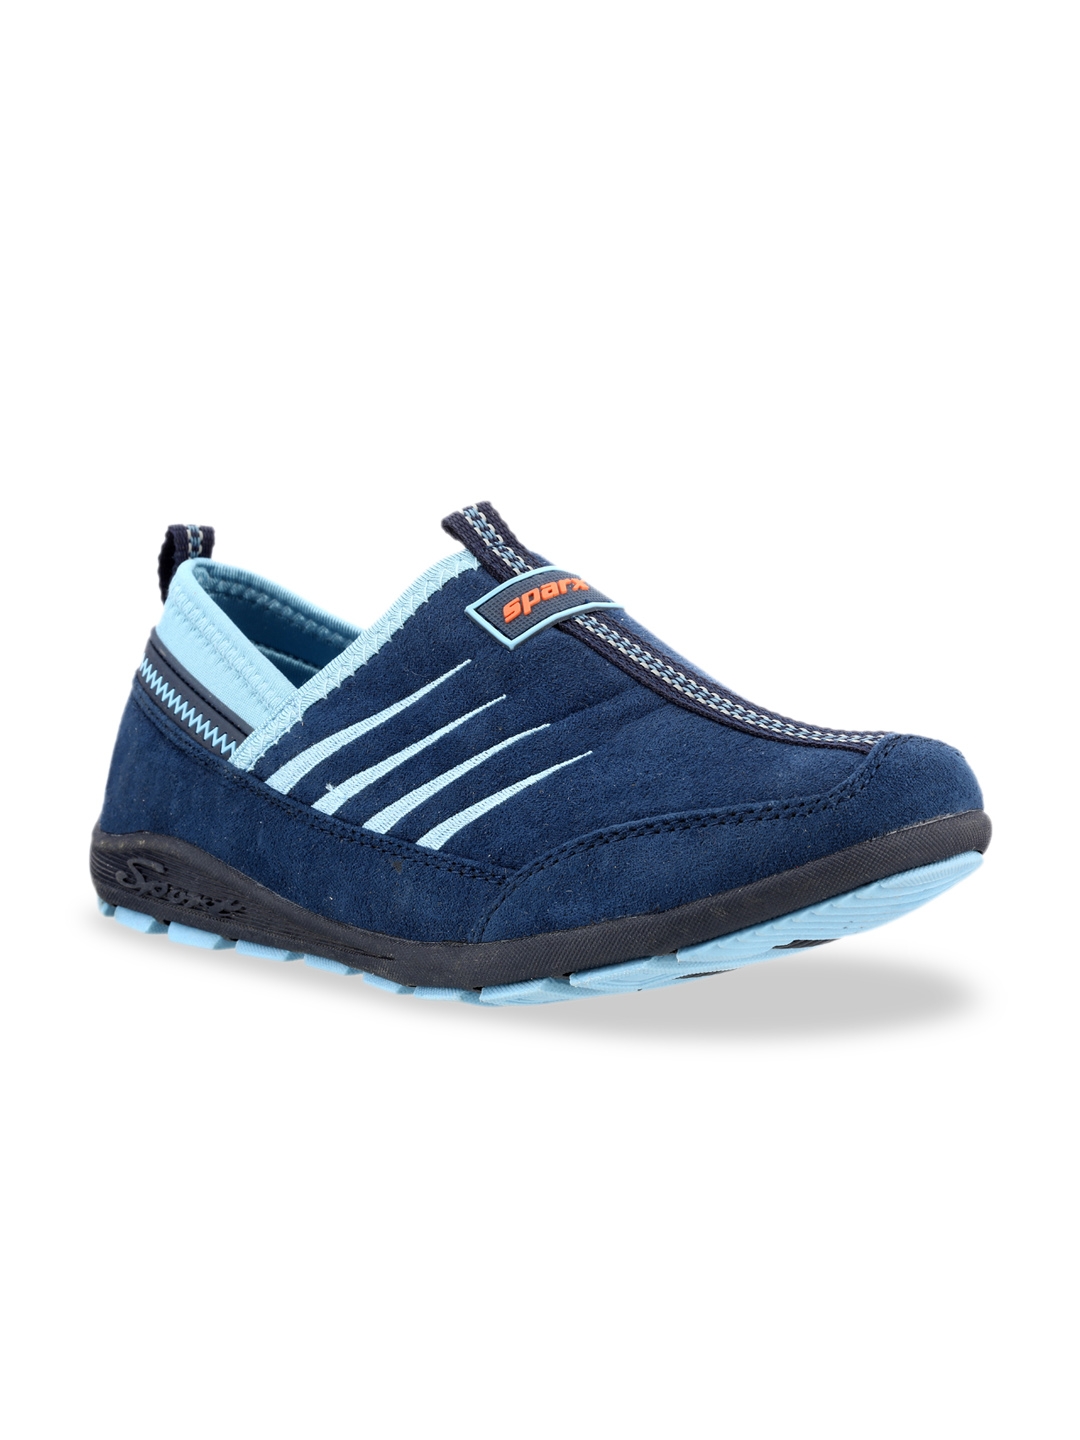 sparx navy blue shoes